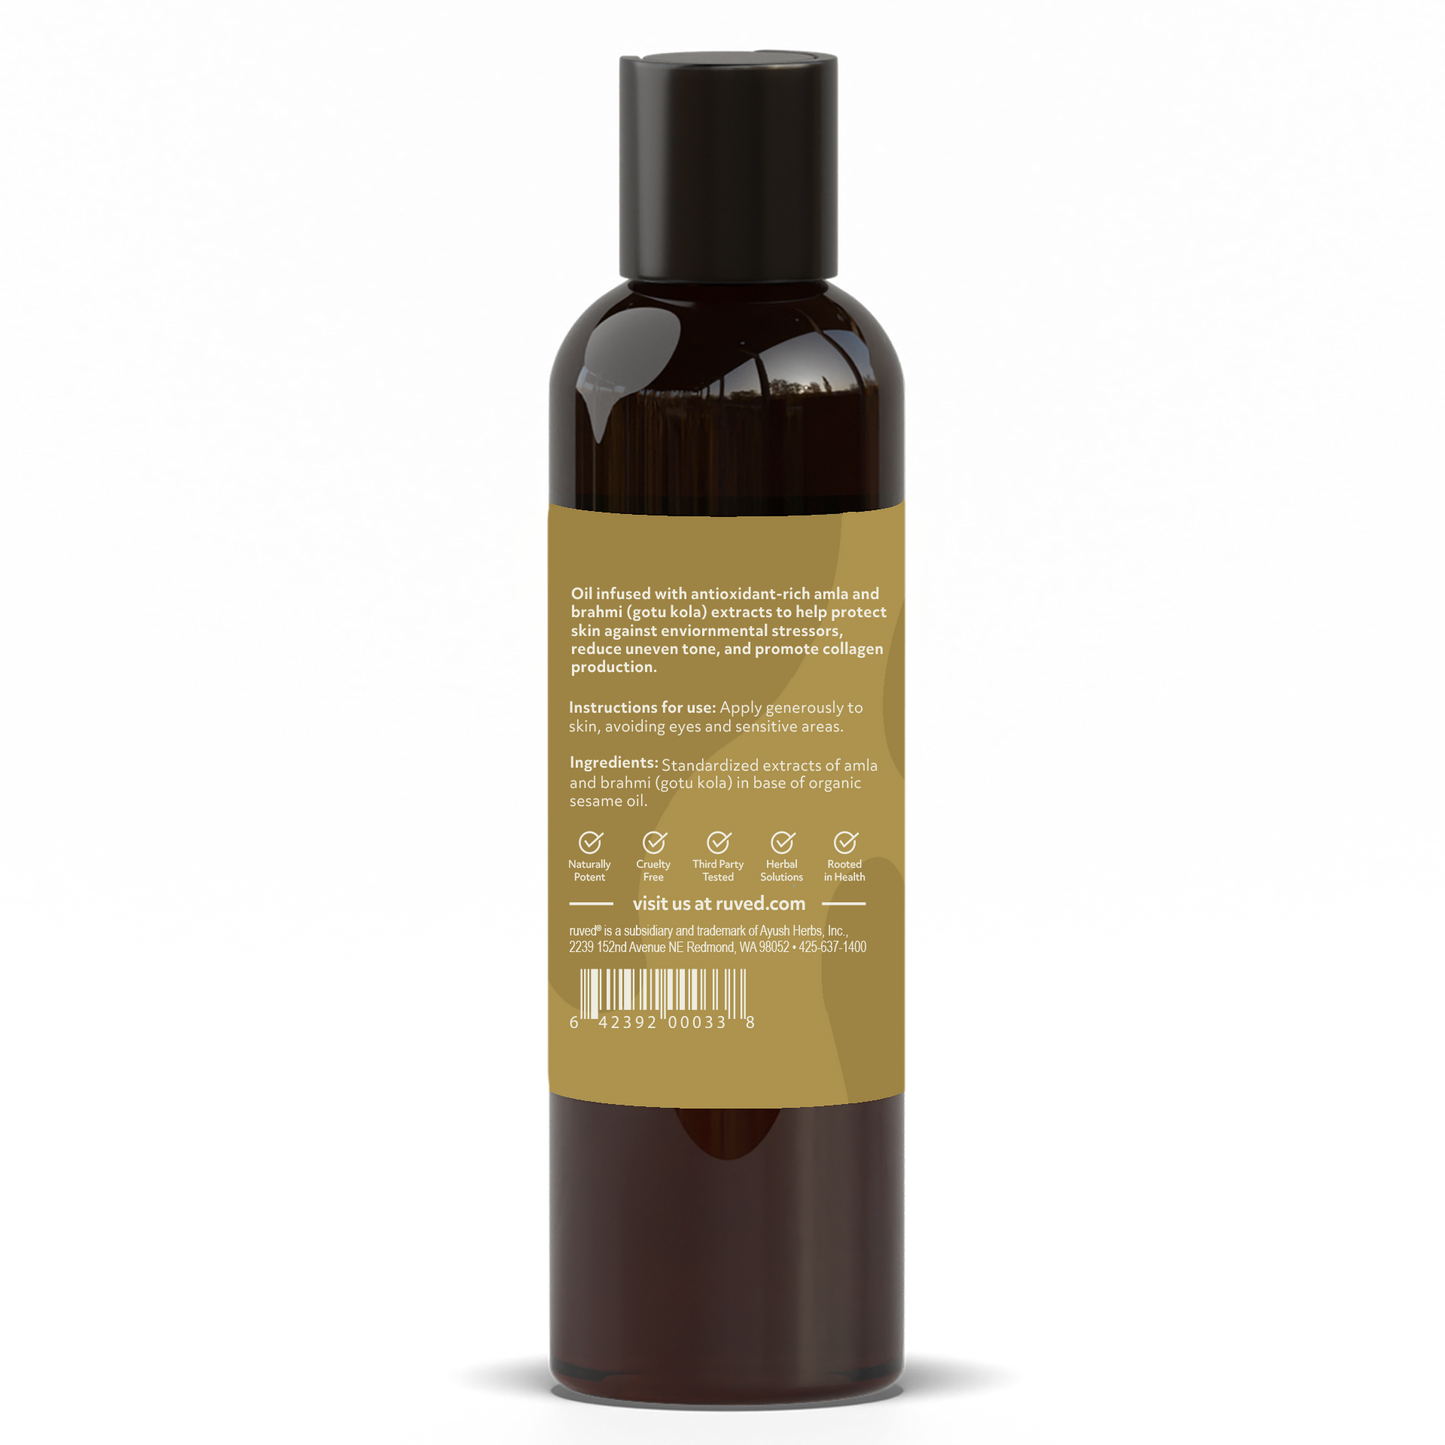 Healthy Aging Body Oil Supplement Facts Back Side - Luxurious blend of natural oils to nourish and rejuvenate skin, promoting a radiant, youthful appearance. 100ml Bottle.